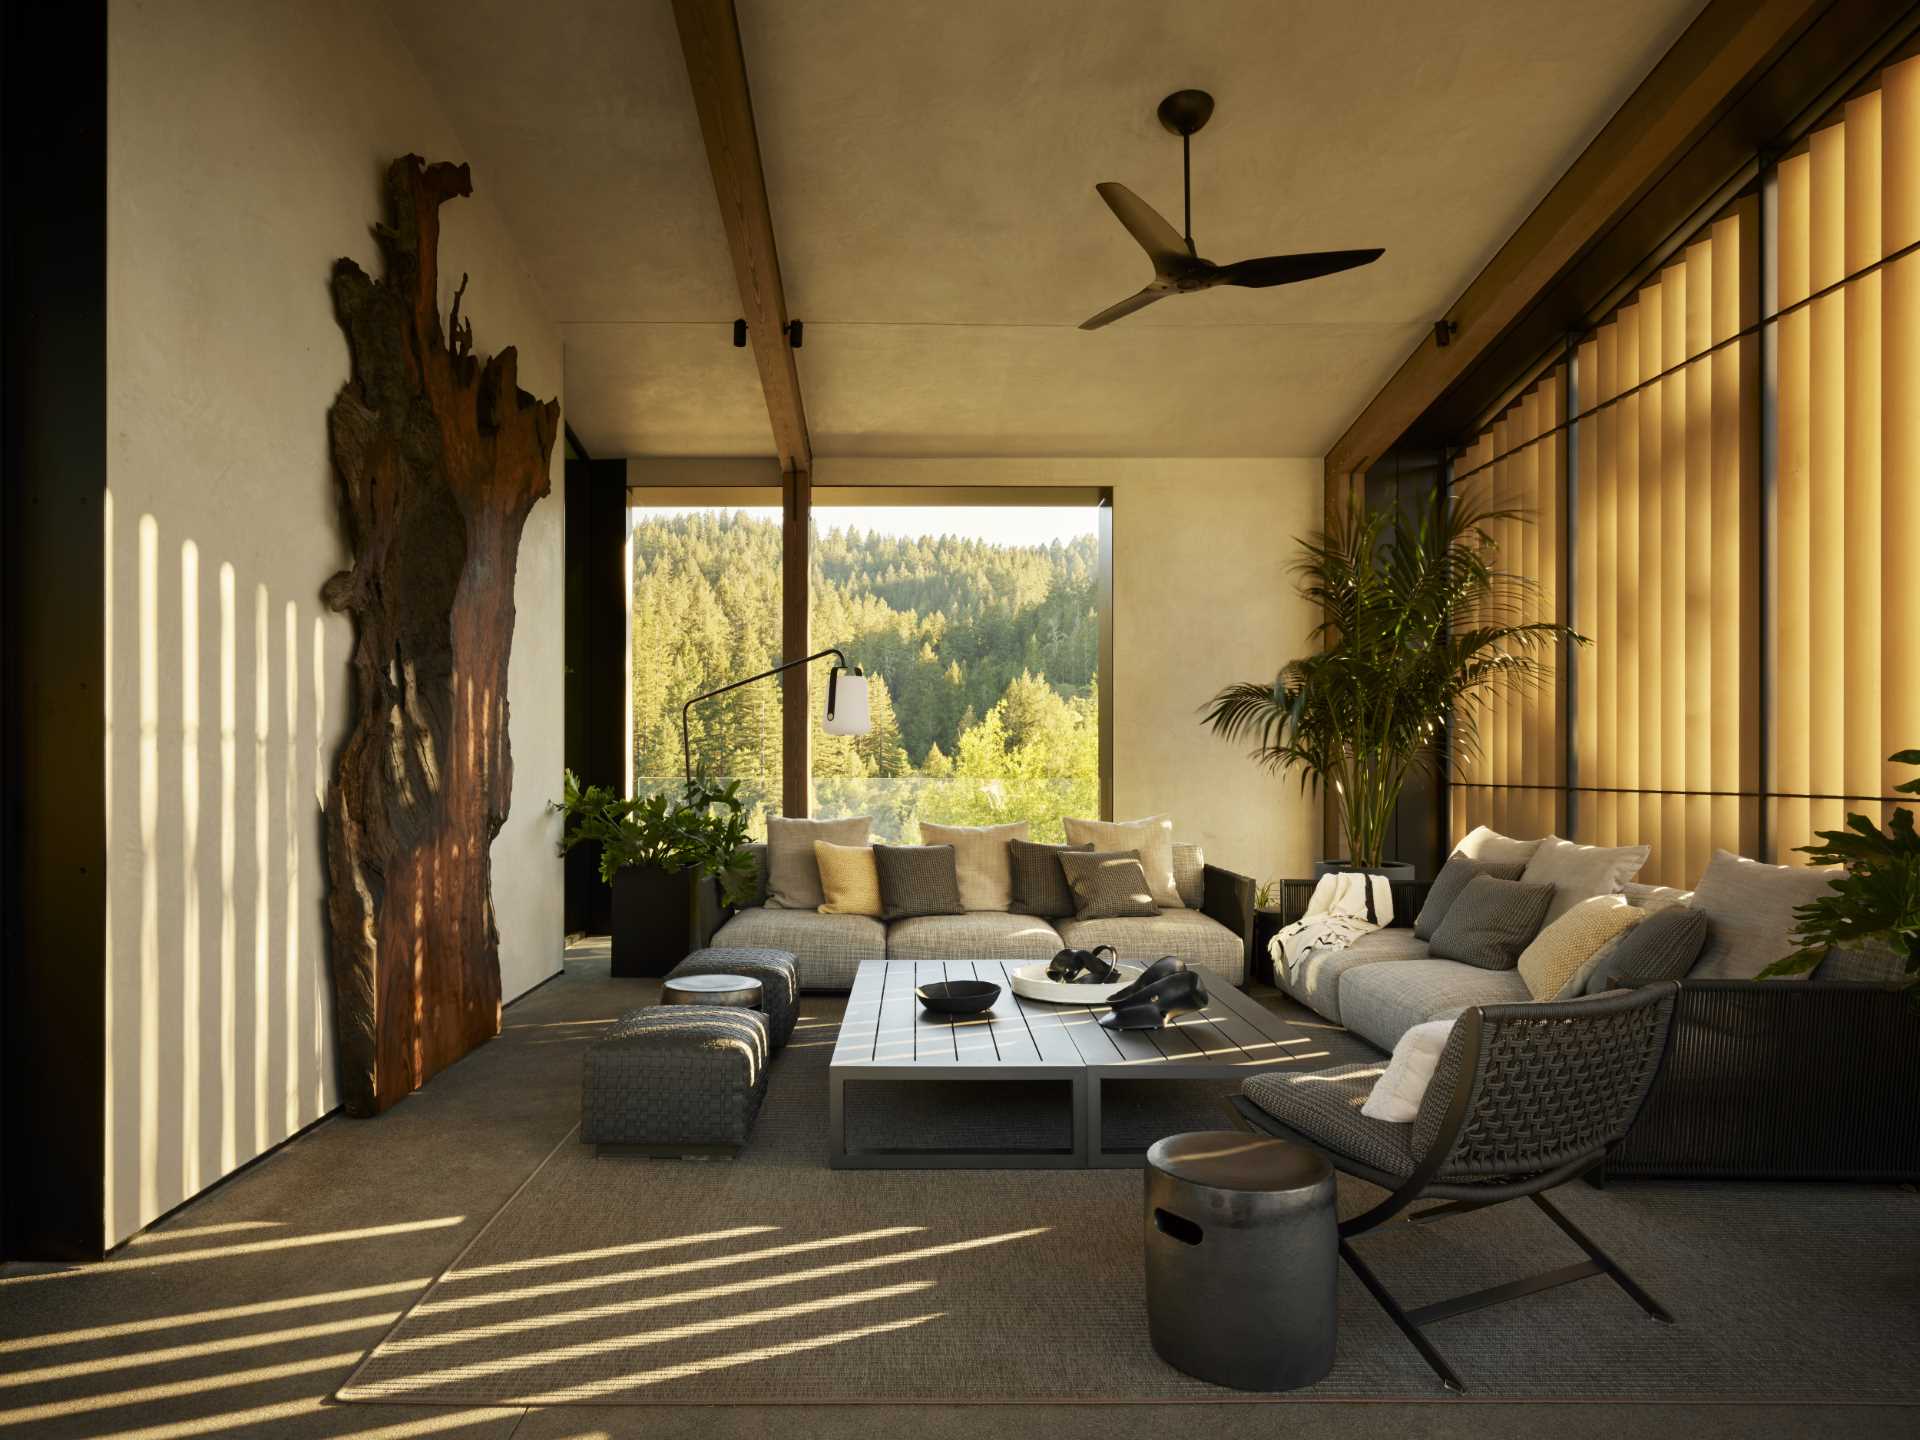 A modern ،me with a pitched ceiling, exposed wood beams, and expansive outdoor living ،es.